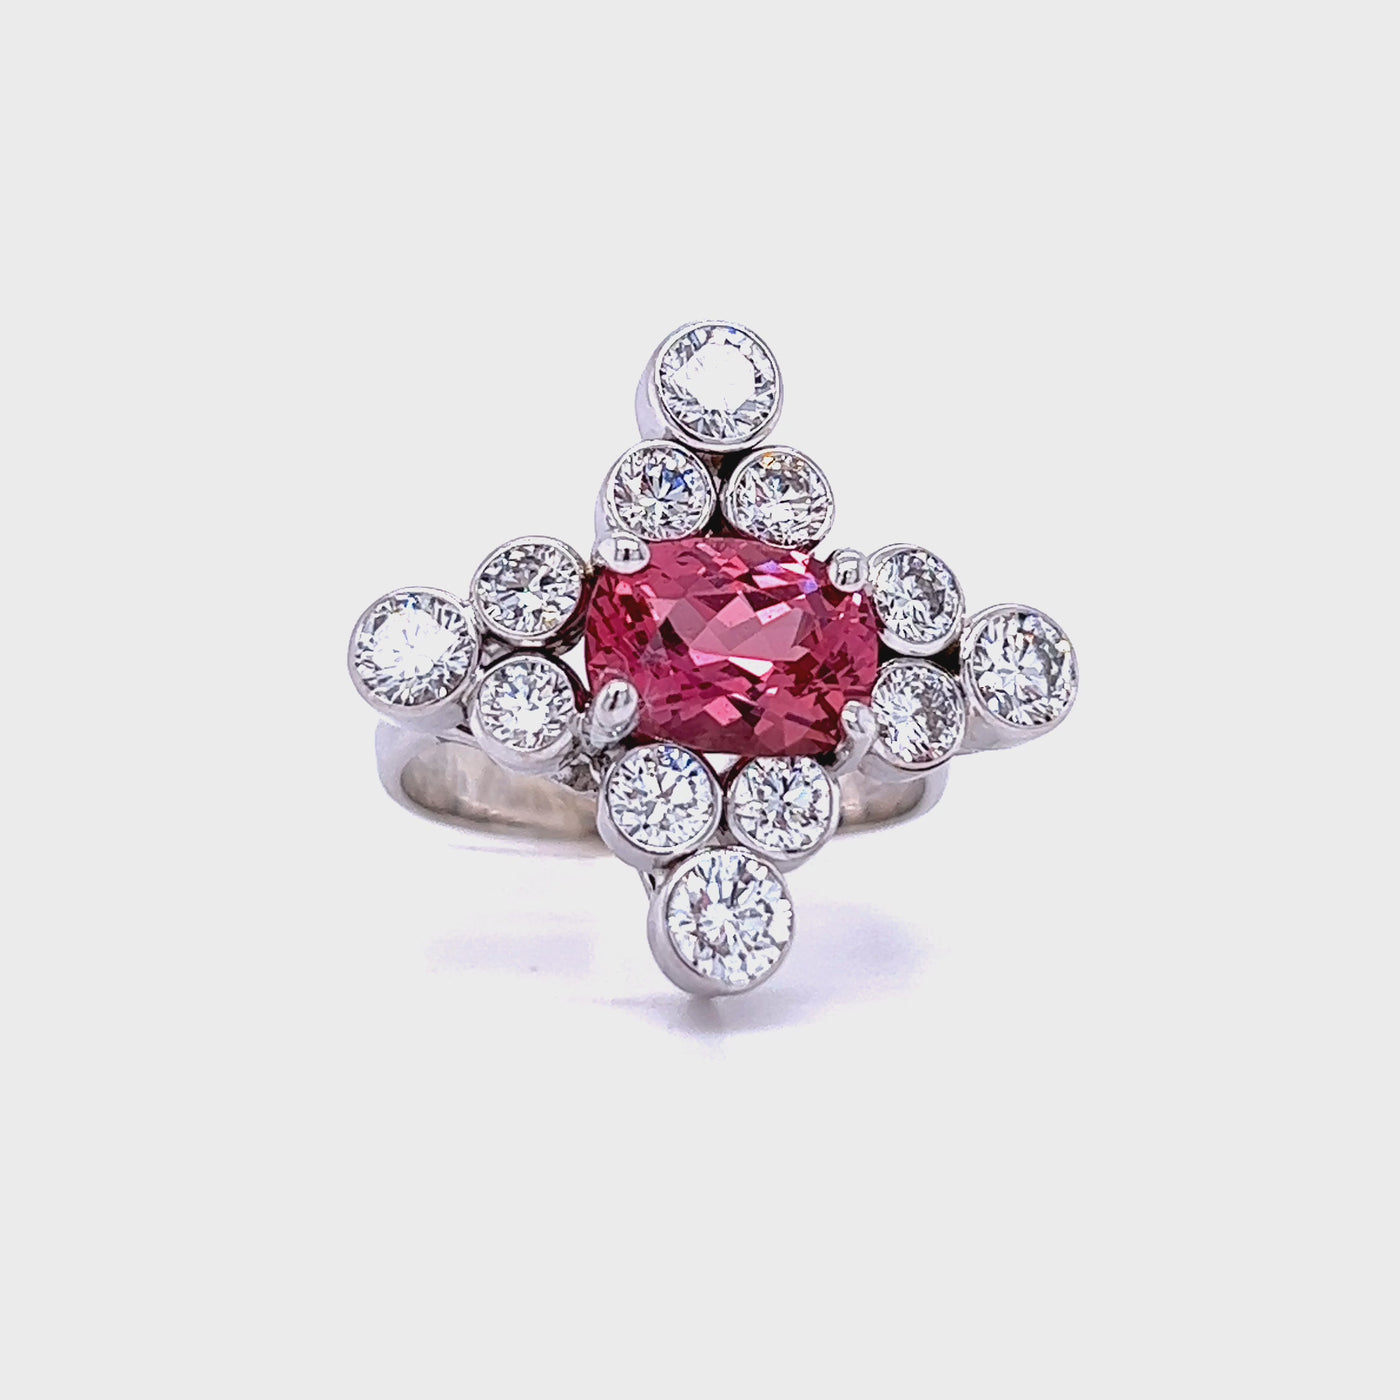 Custom 14k White Gold Oval Padparadscha Sapphire and Diamond Ring by Paul Richter